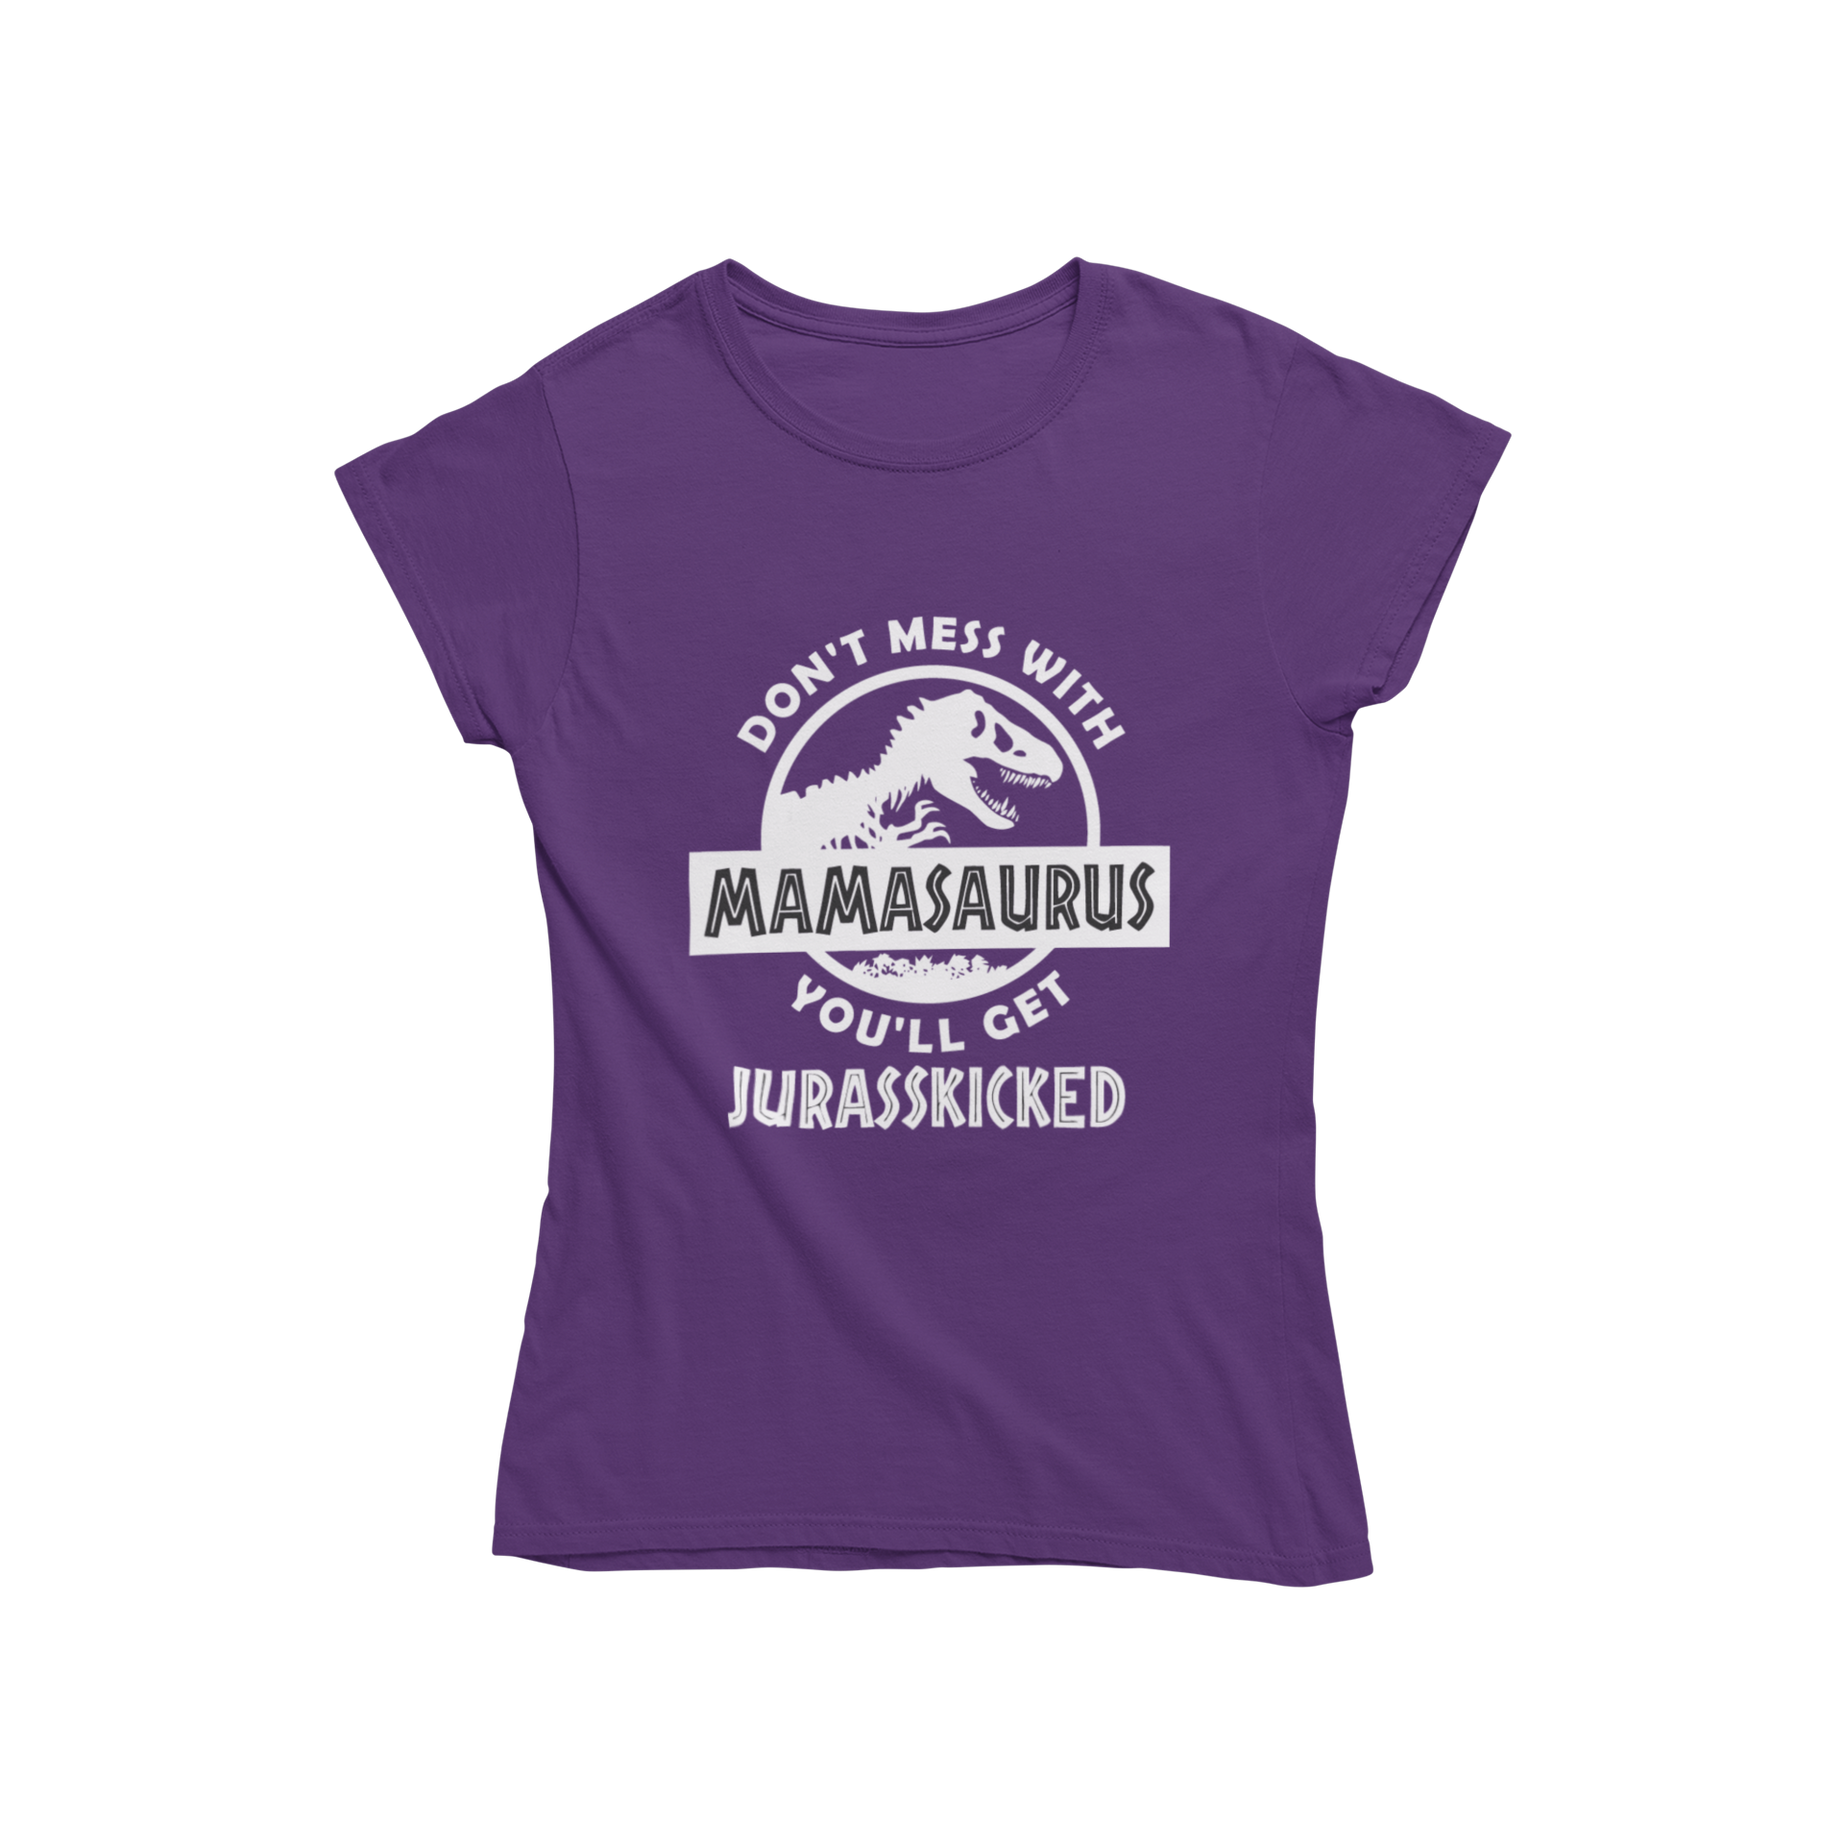 Looking for a stylish t-shirt that shows off your love of dinosaurs? Check out Teevolution! Our women's fitted t-shirt features a cool design inspired by a popular dinosaur park. Get ready to unleash your inner Mamasaurus with Teevolution.